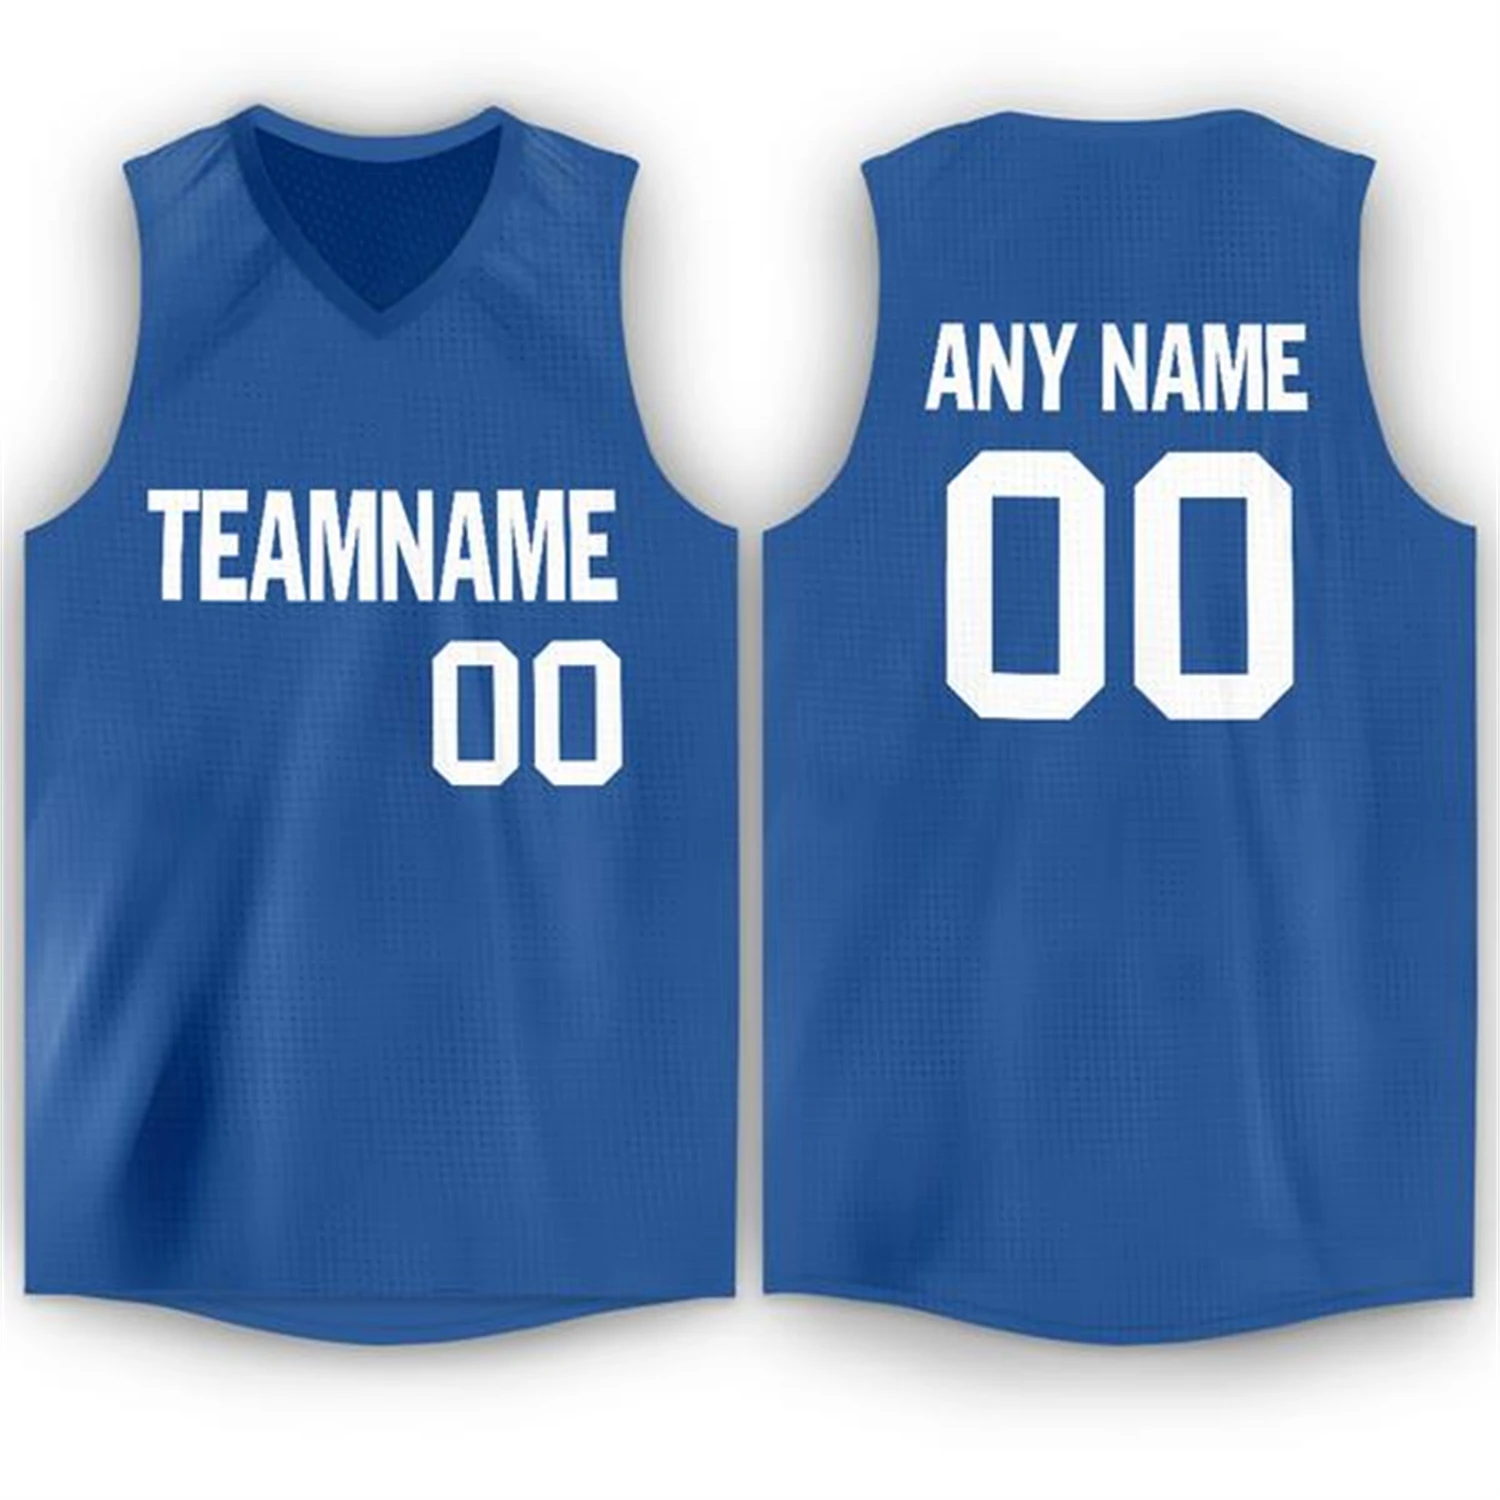 

Custom Basketball Jersey Personalized Team Name/Numbers Quick-Dry Soft Sleeveless Sports Uniforms for Men/Youth Outdoor Big size